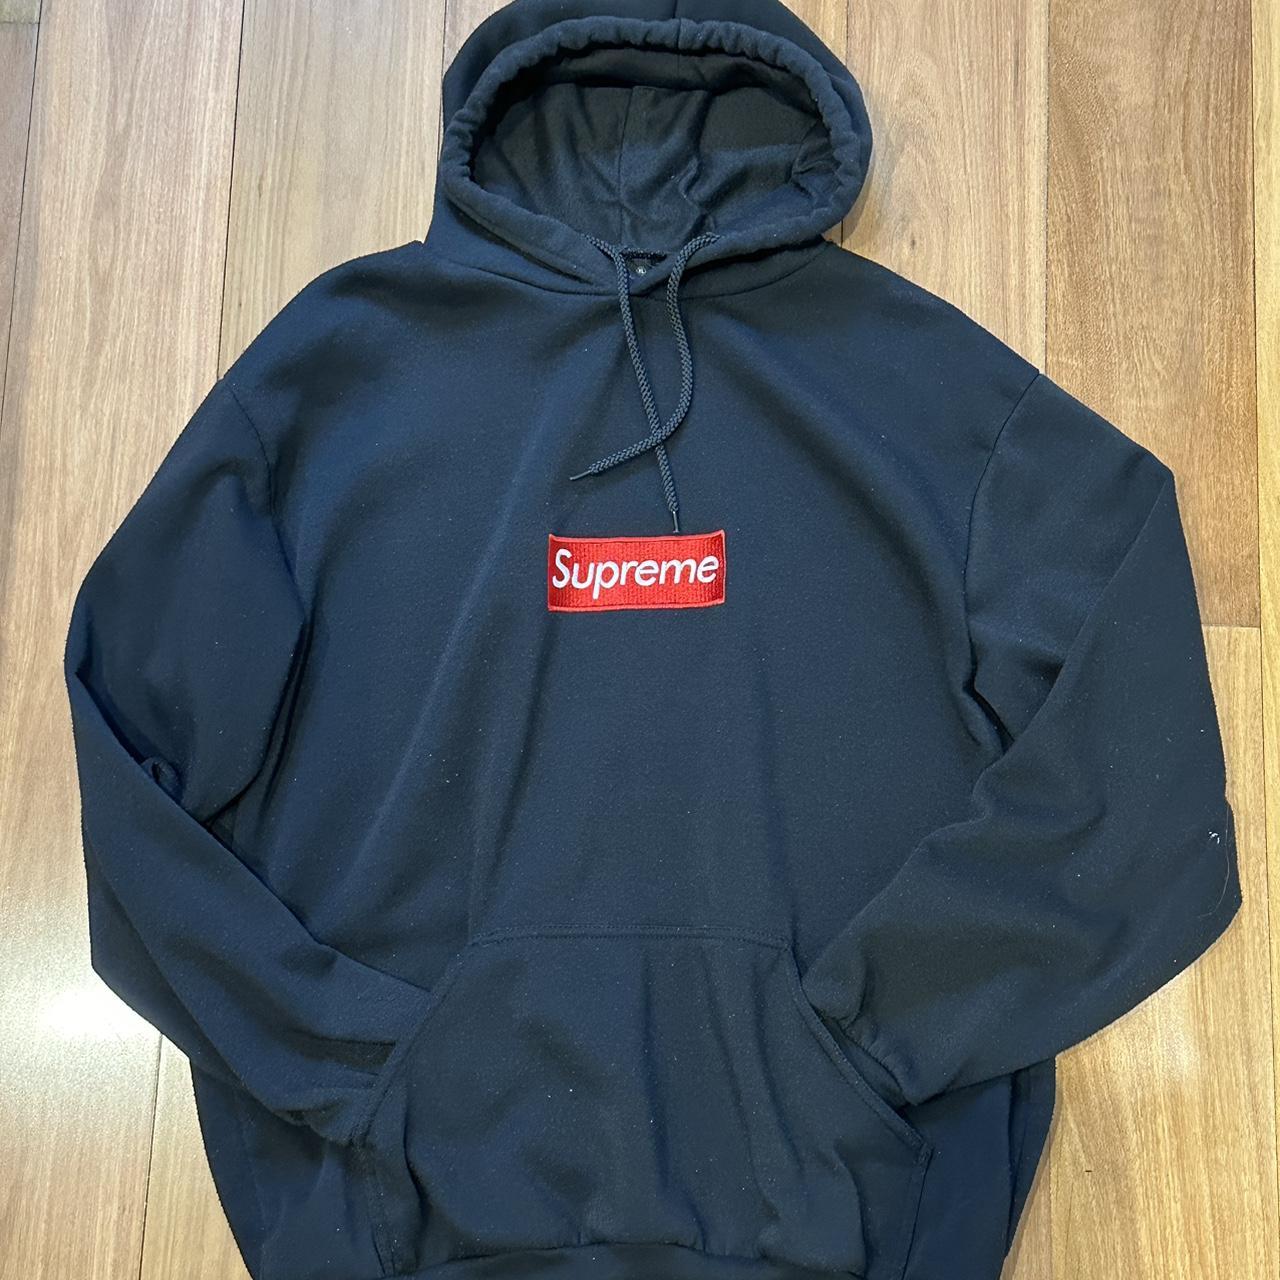 Knock off Supreme hoodie, size XL but fits small size - Depop